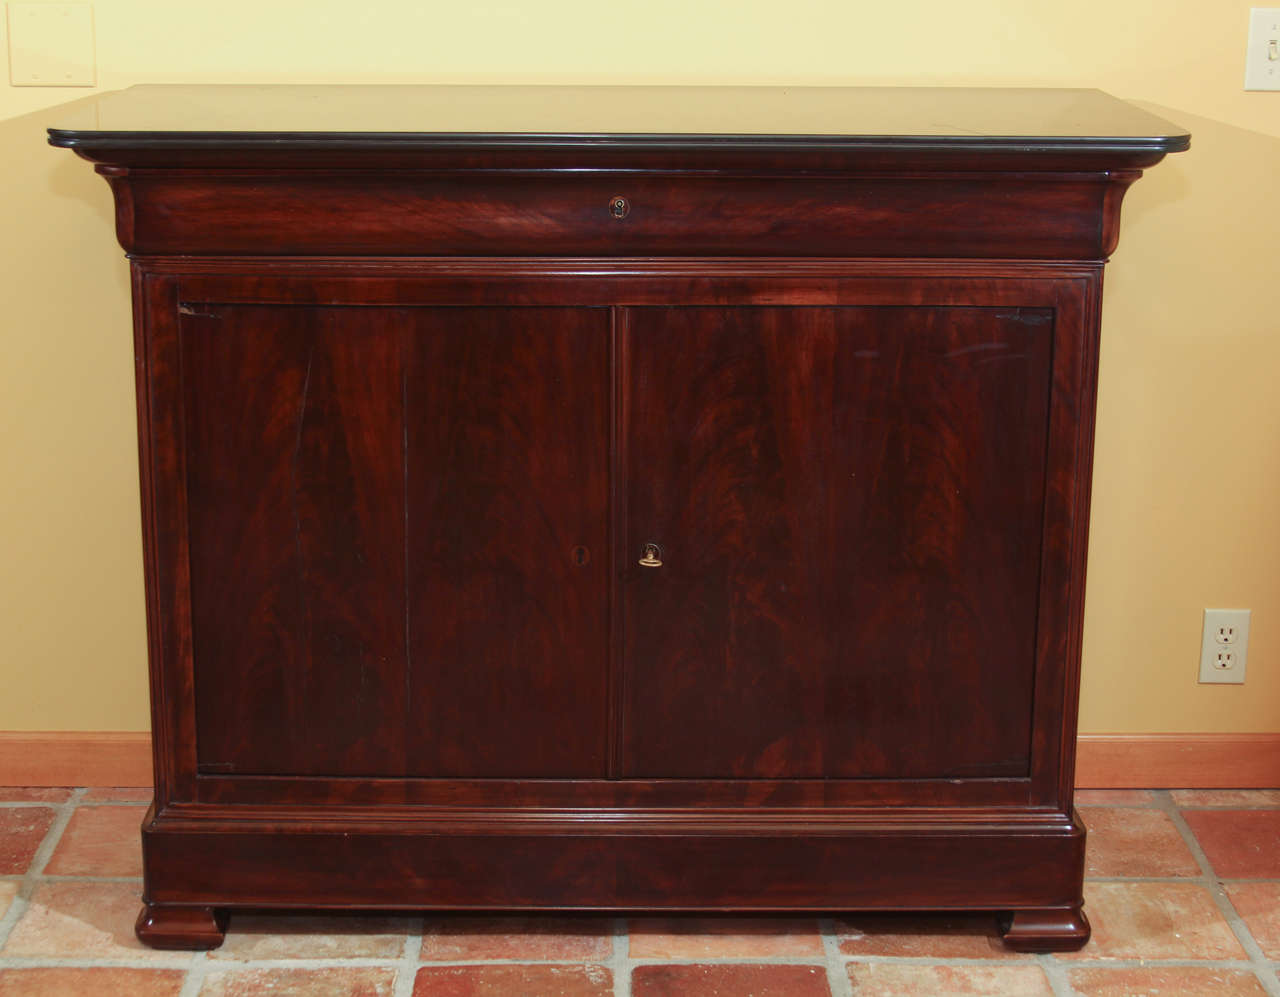 Louis Philippe Mahogany Buffet

This is a handsome Louis Philippe period buffet with a black stone top.

Under the stone top there is a single, original dove-tailed drawer in the shape of a Roman ogee.

The body of the chest features two doors